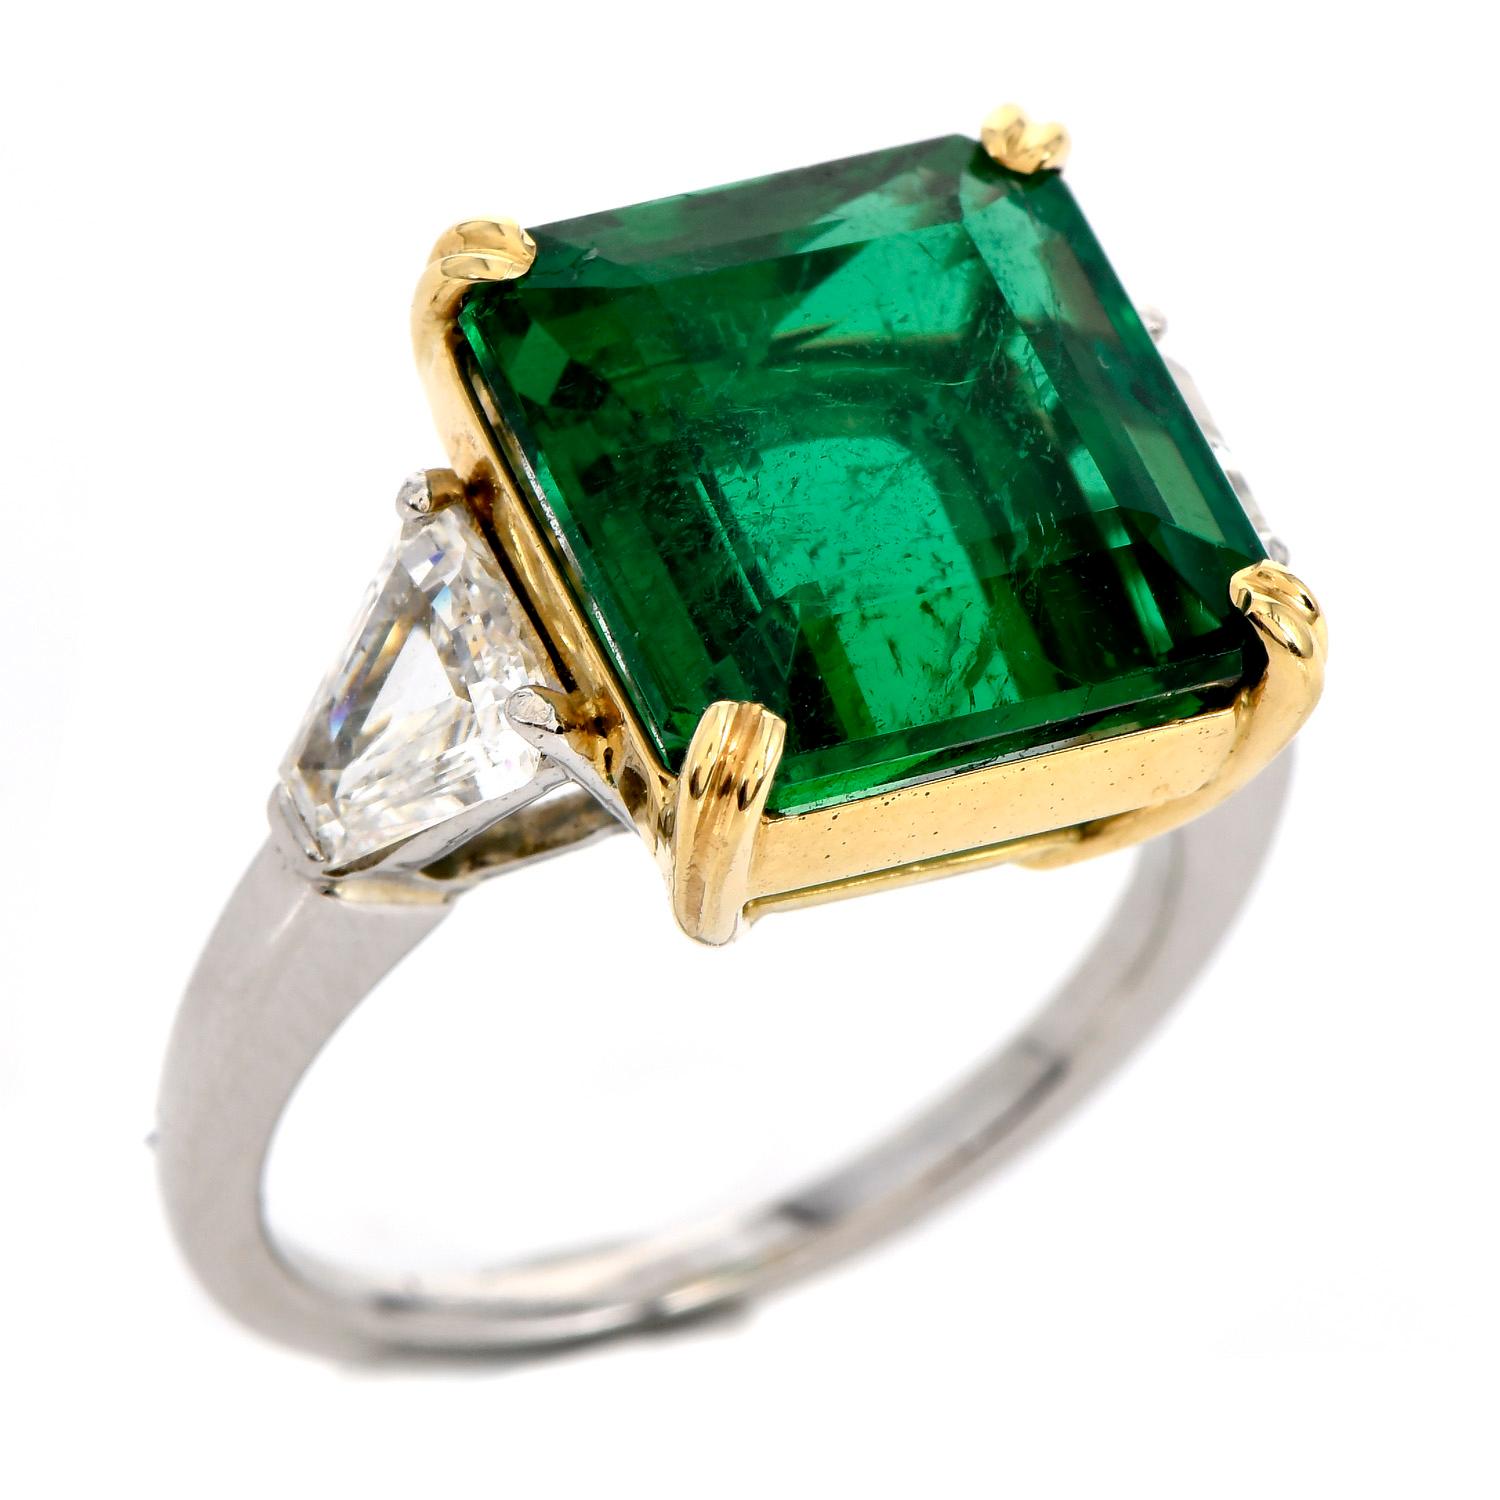 Certified  9.02cts Zambian Emerald Diamond Platinum Cocktail Ring For Sale